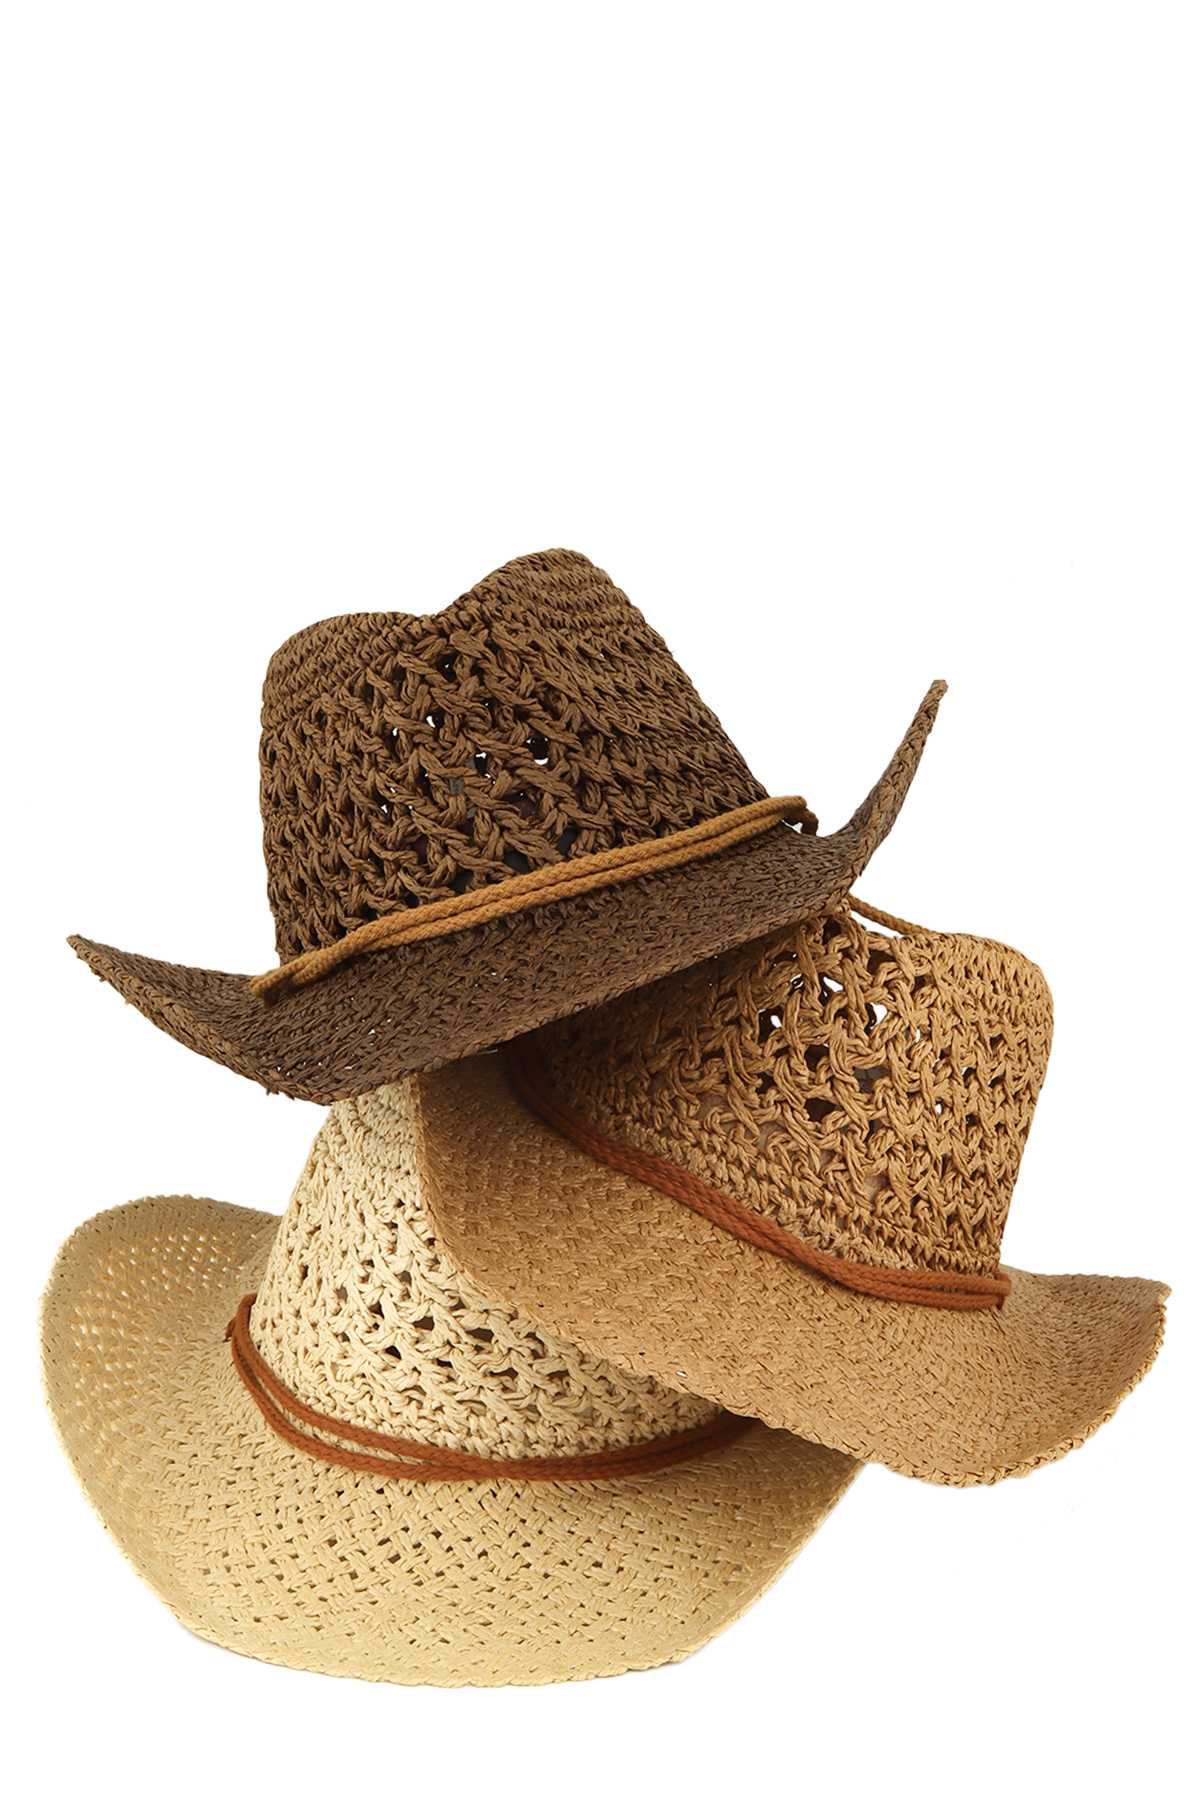 Crochet Weave Cowboy Fedora with Strap